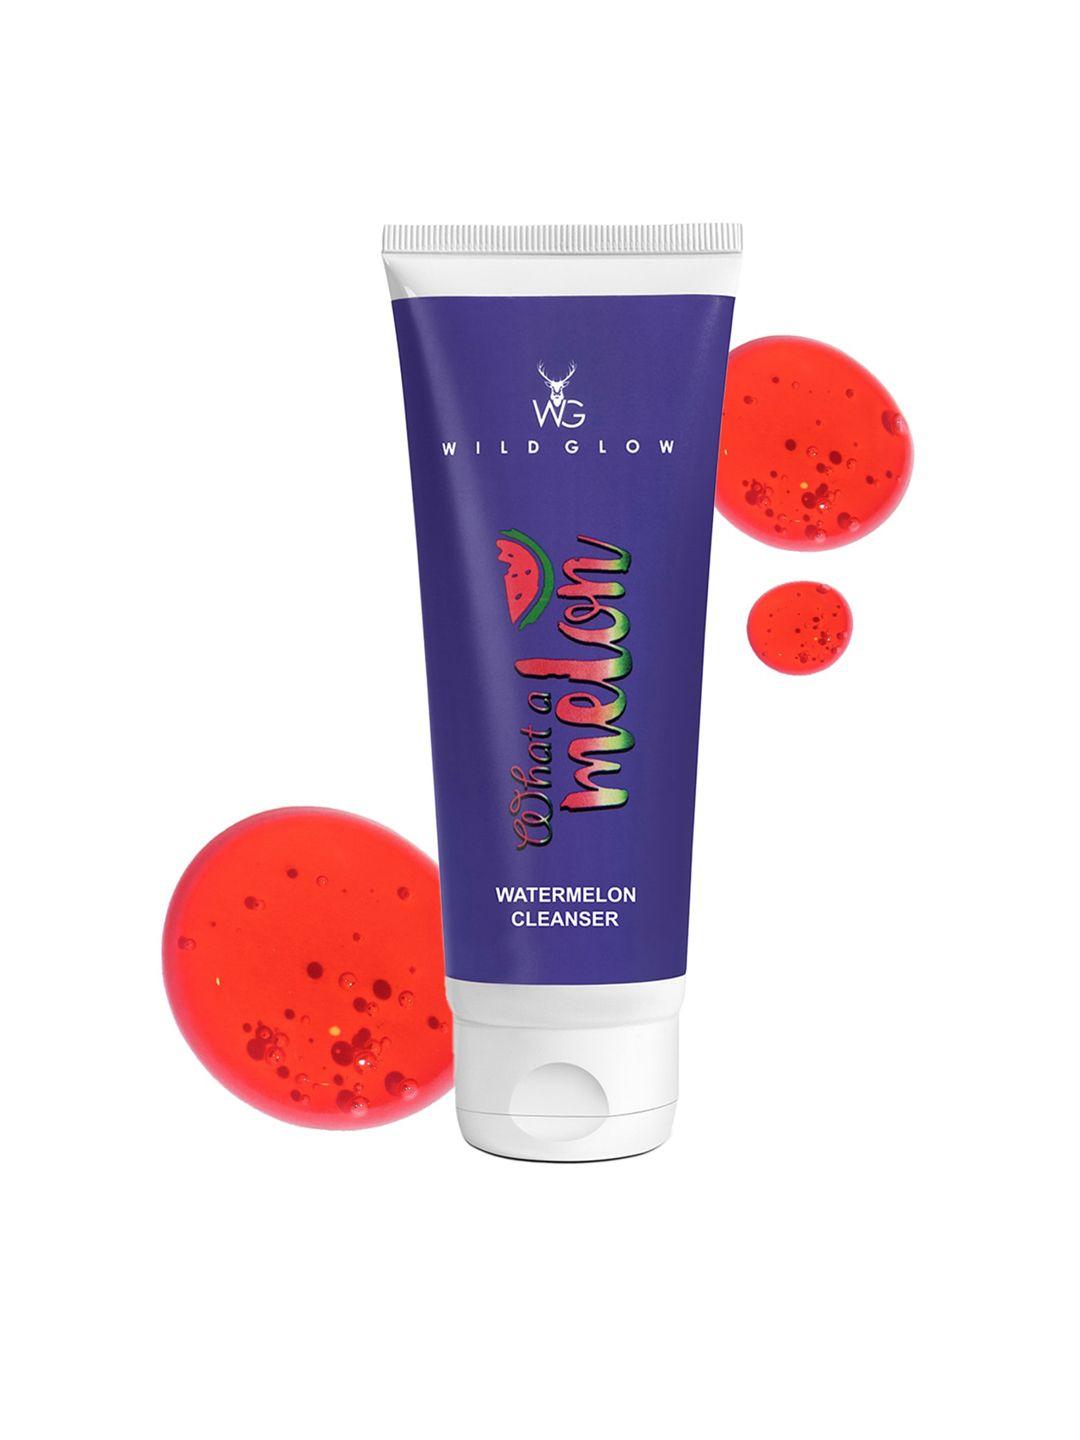 wildglow watermelon face wash get oil reduction & sun protection-100ml